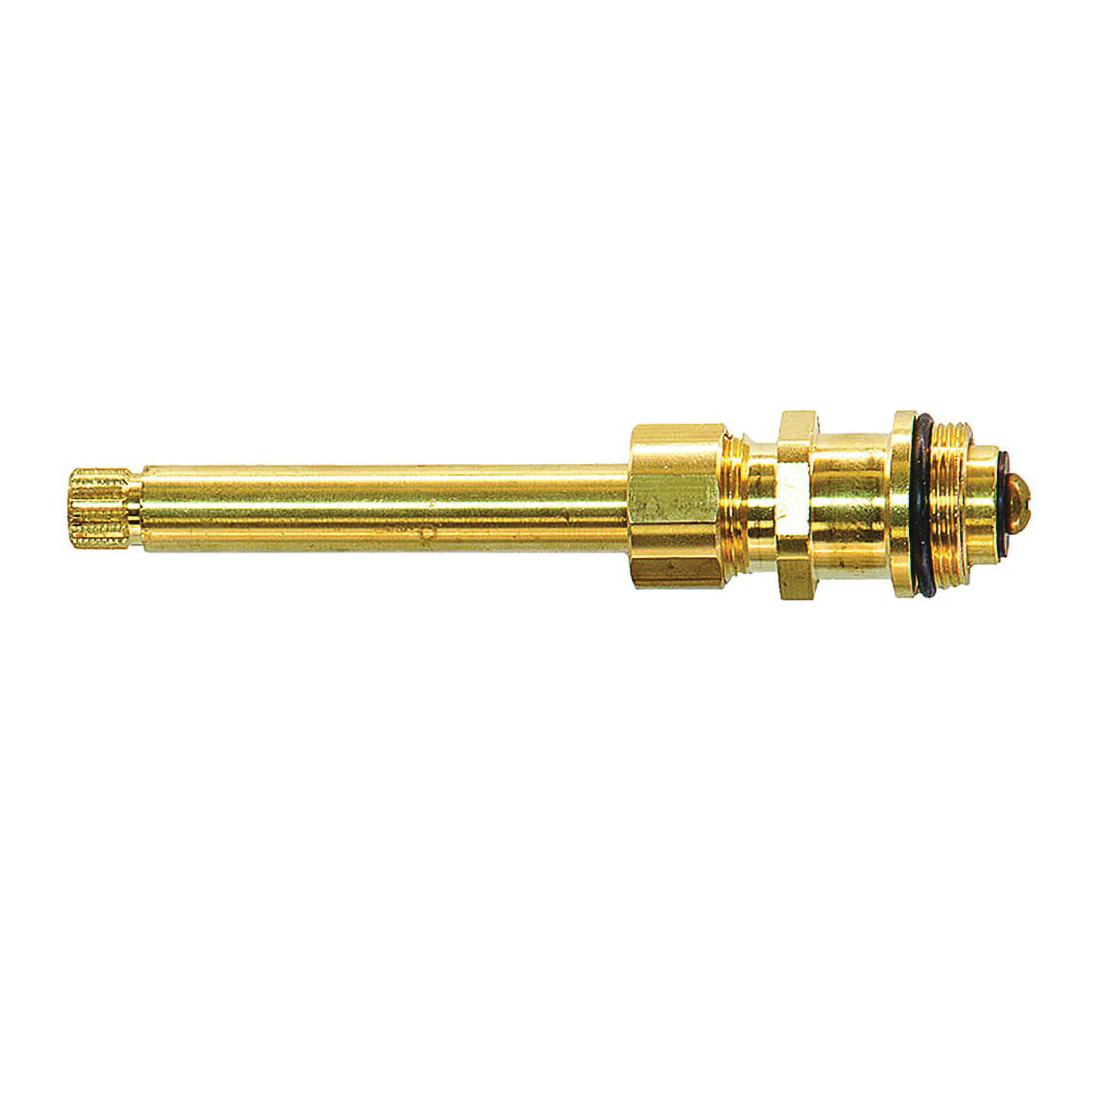 16933B Faucet Stem, Brass, 4-1/2 in L, For: Sterling Two Handle Tub/Shower Faucets